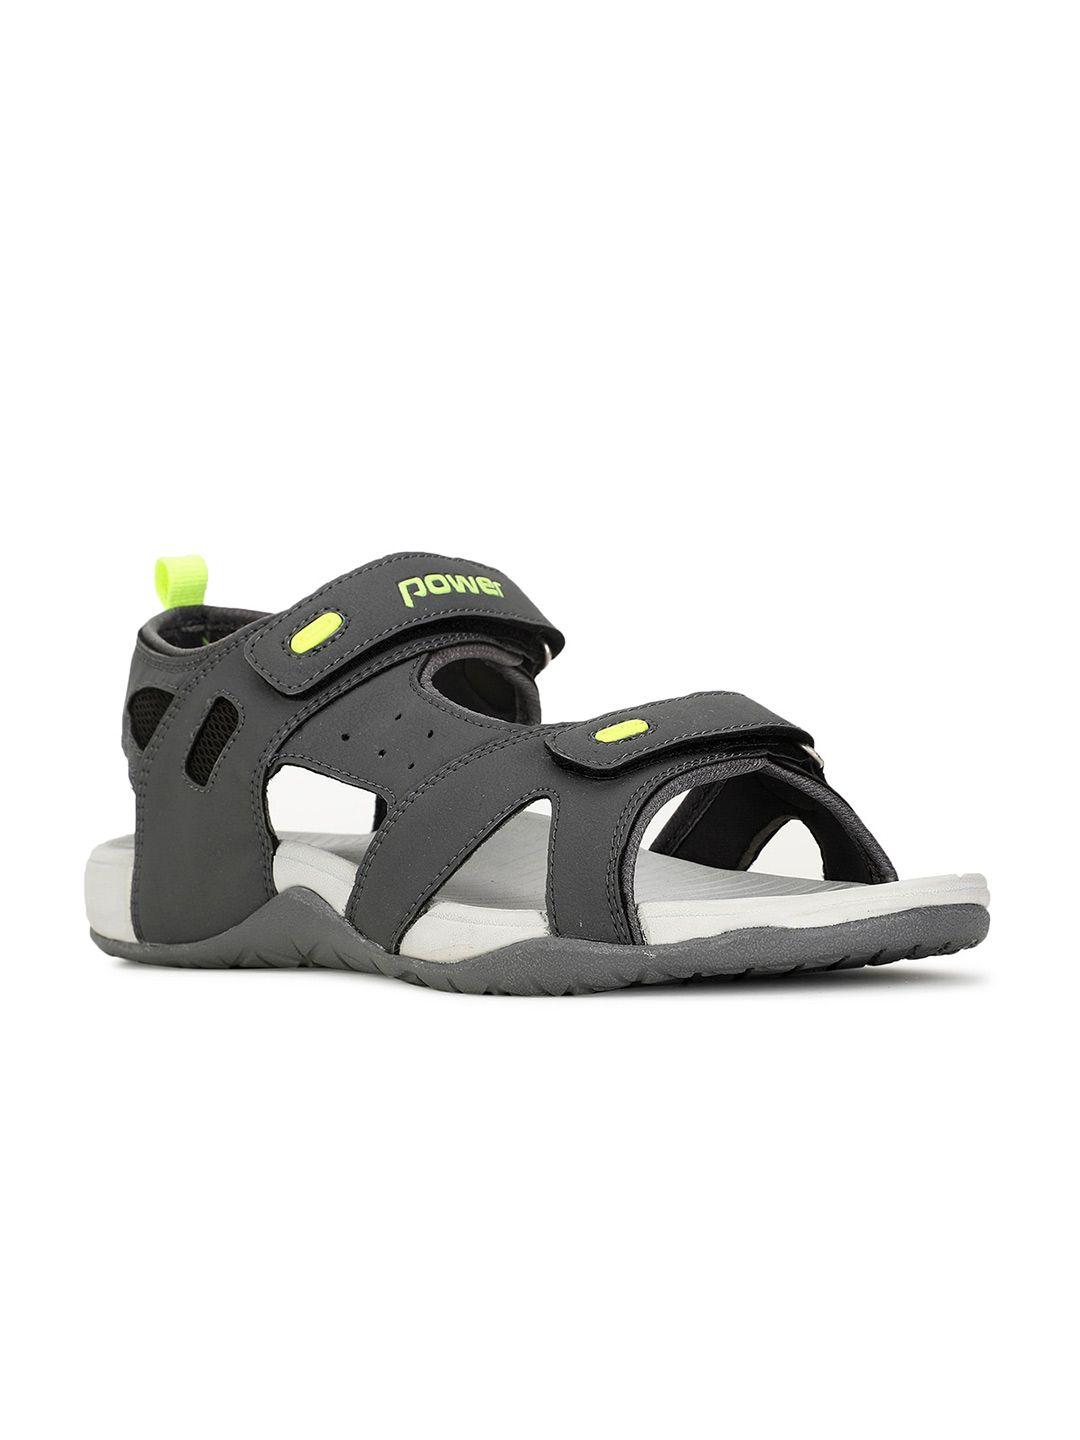 power-men-perforated-sports-sandals